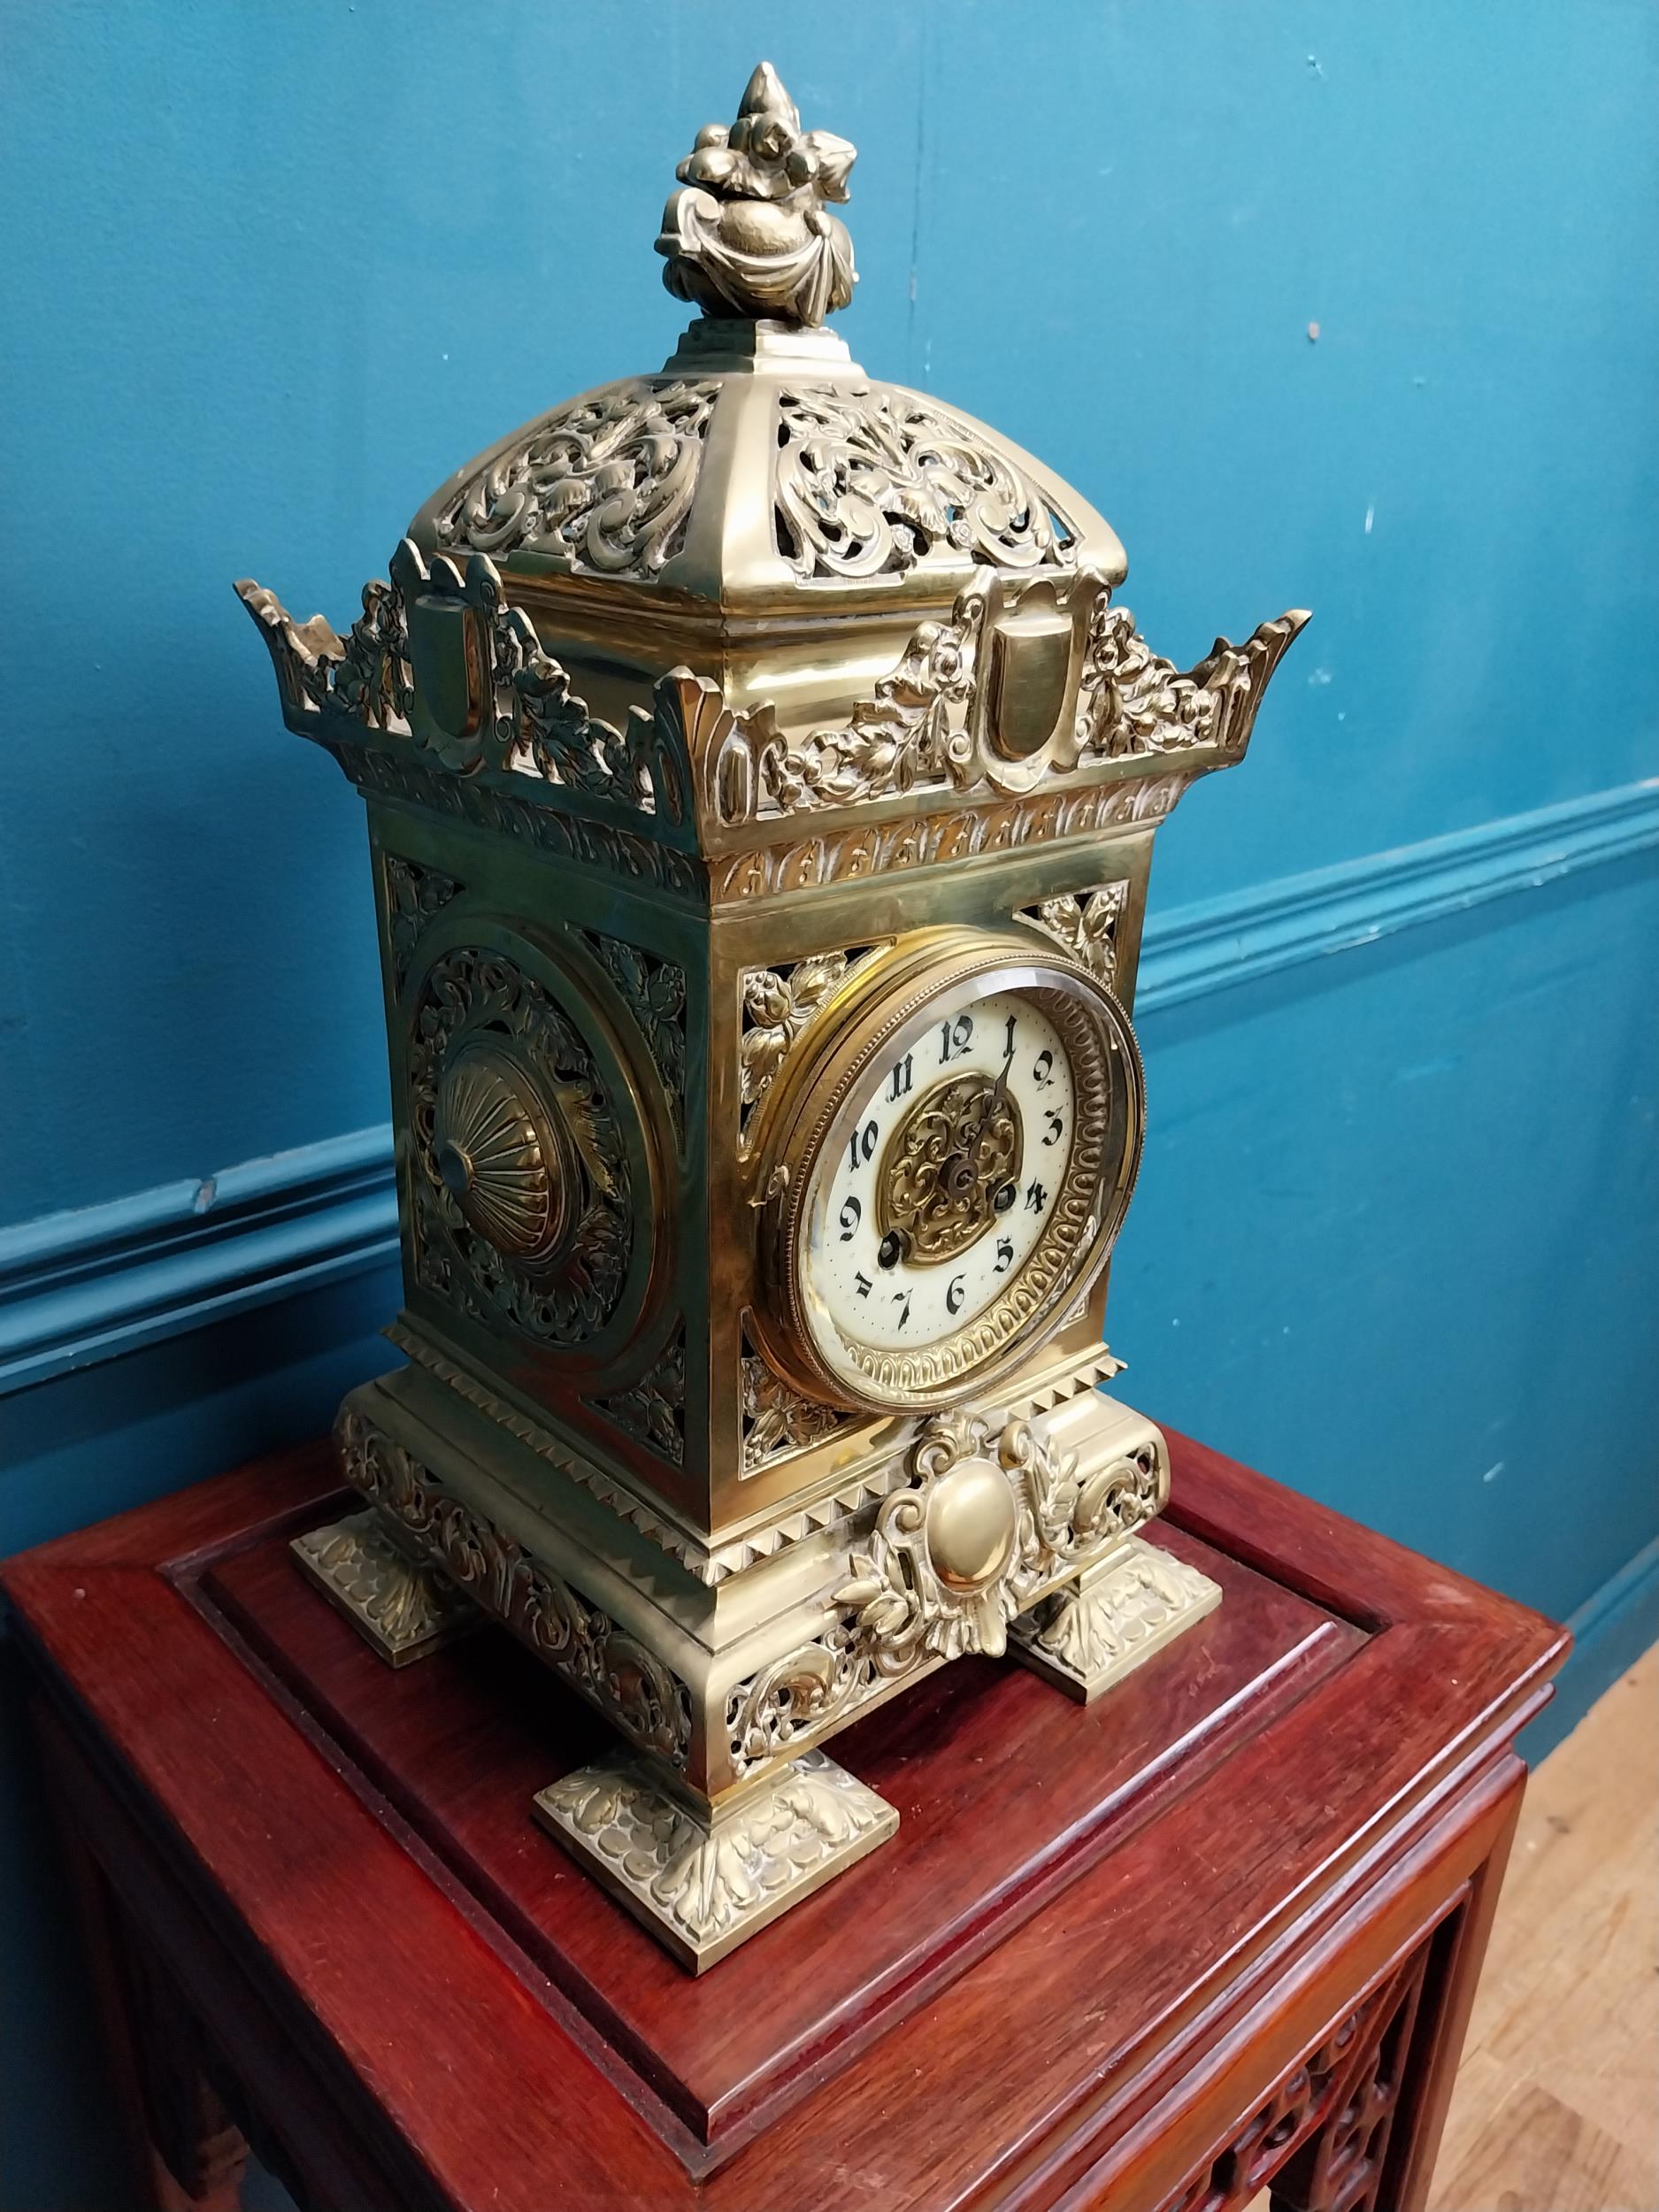 Decorative brass mantle clock in the Victorian style {39 cm H x 19 cm W x 19 cm D}. - Image 7 of 9